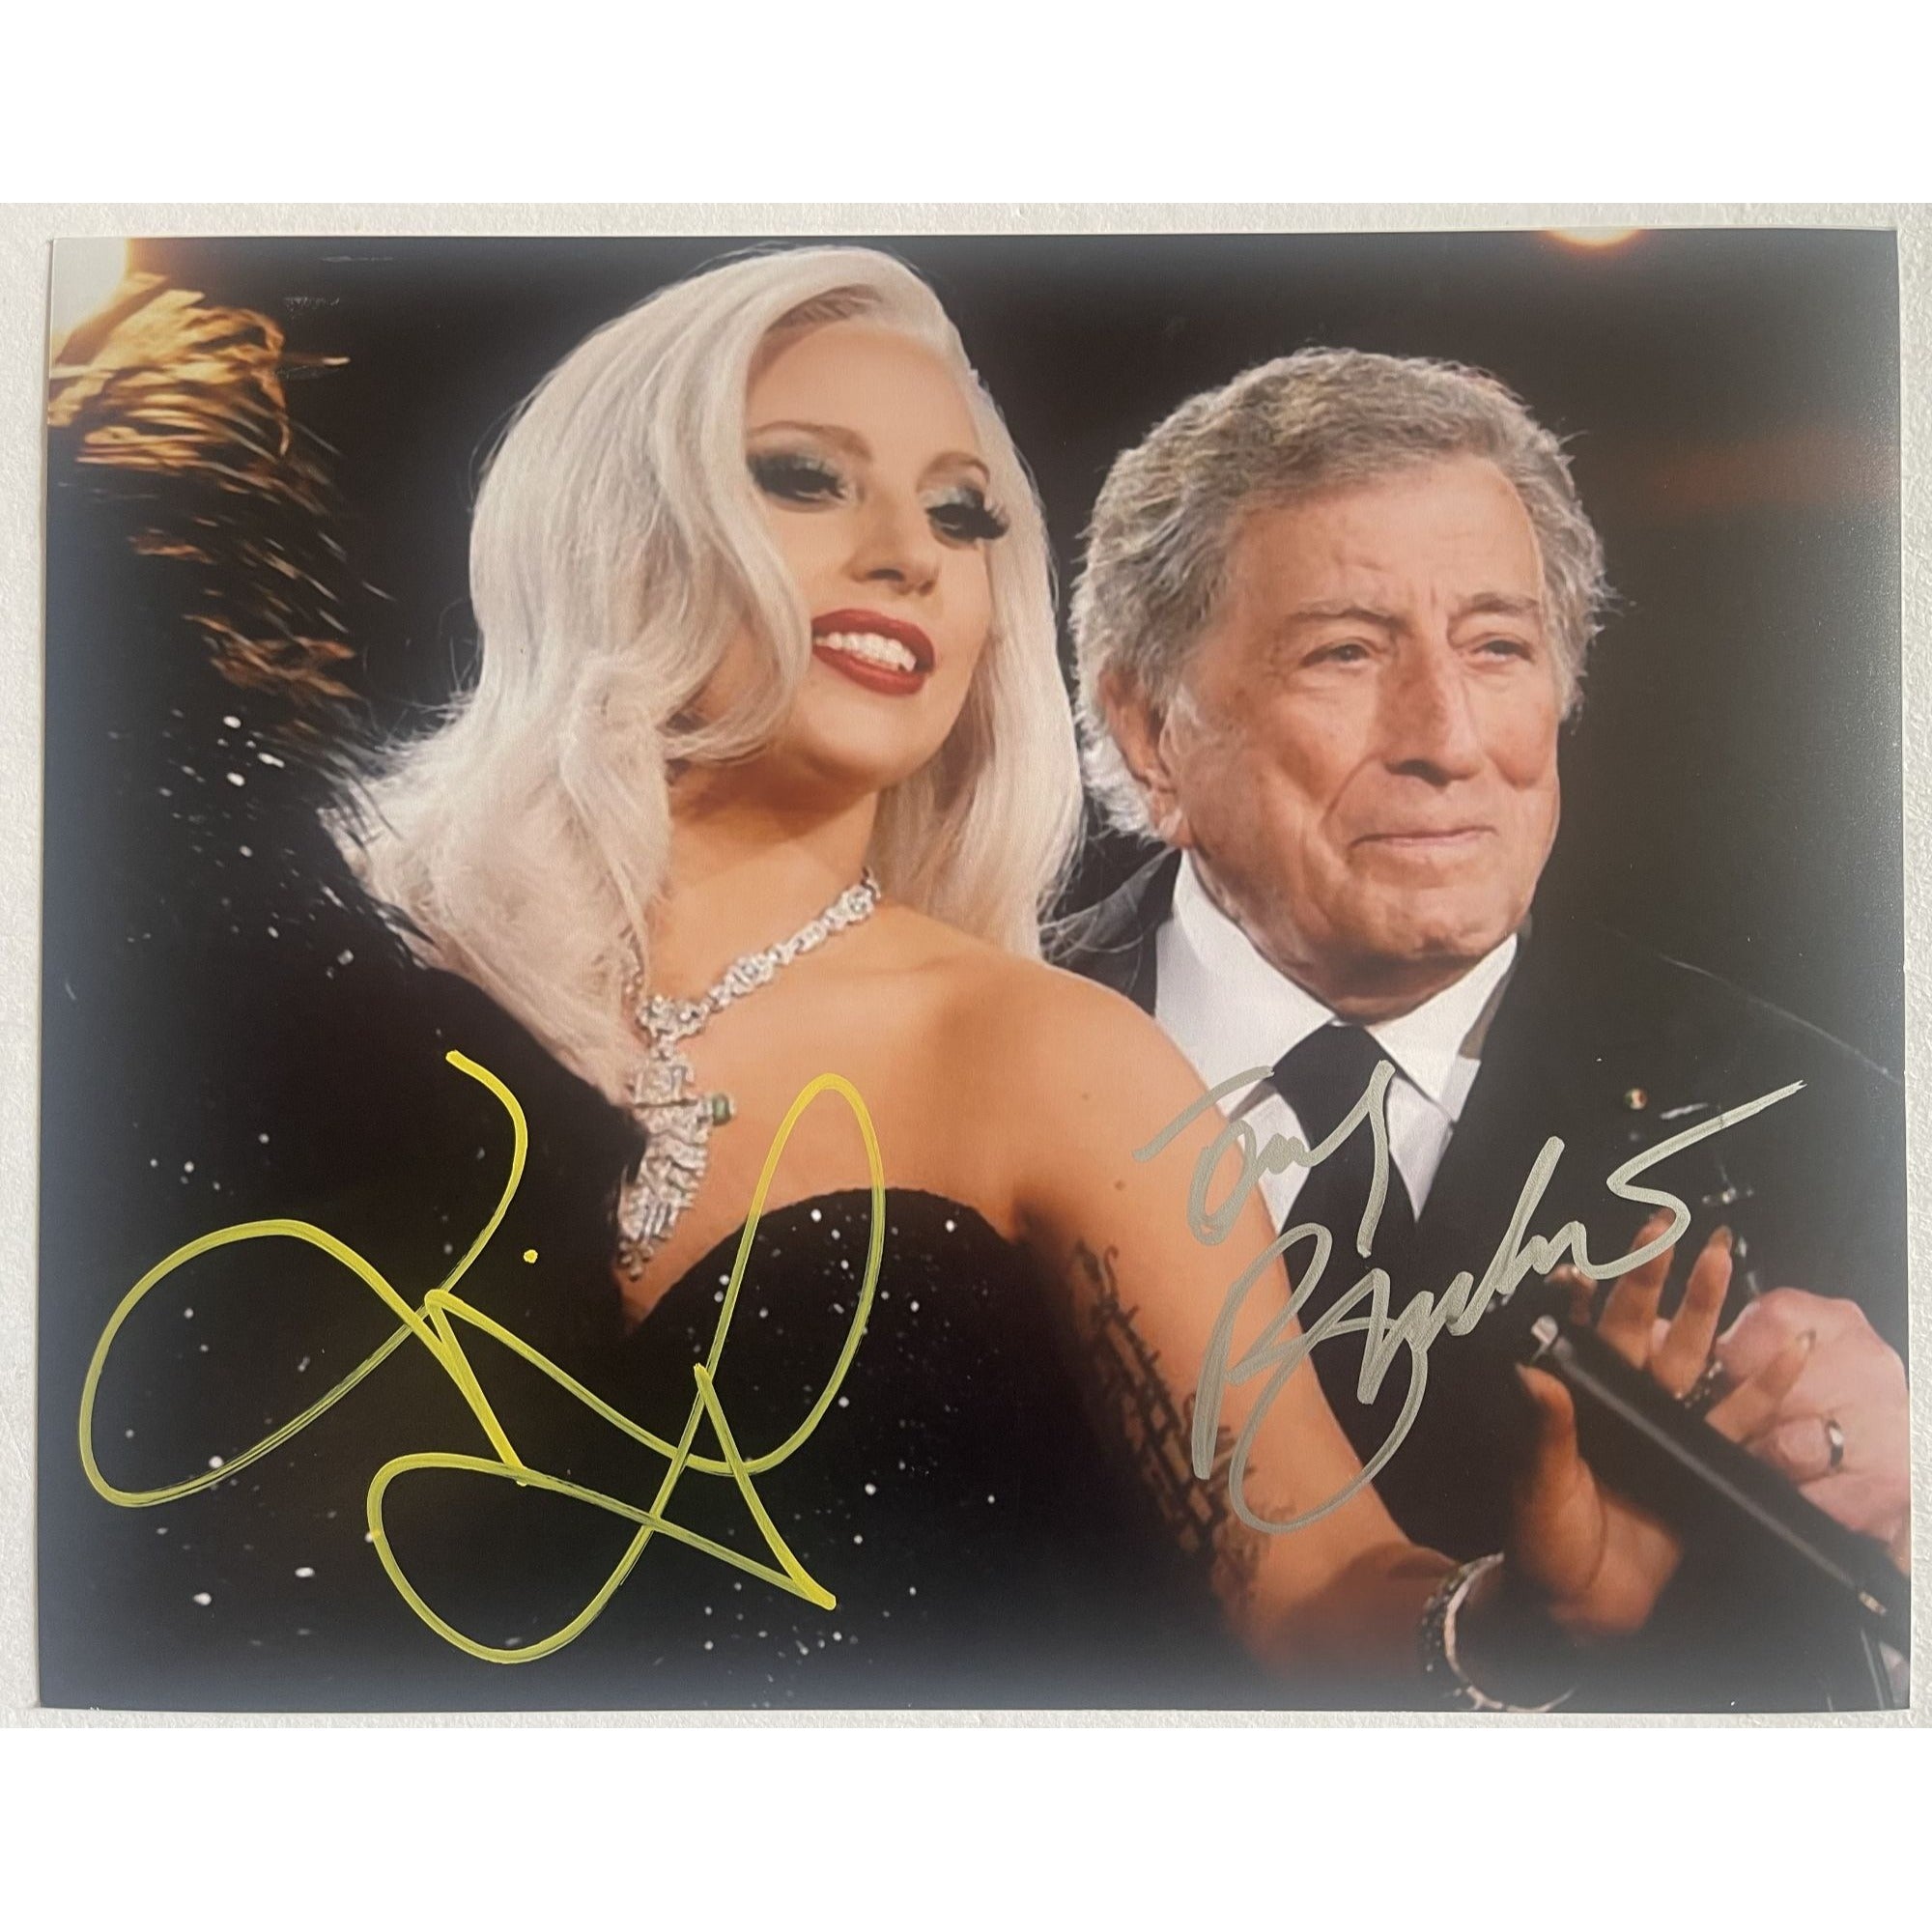 Tony Bennett and Lady Gaga 8x10 photo sign with proof